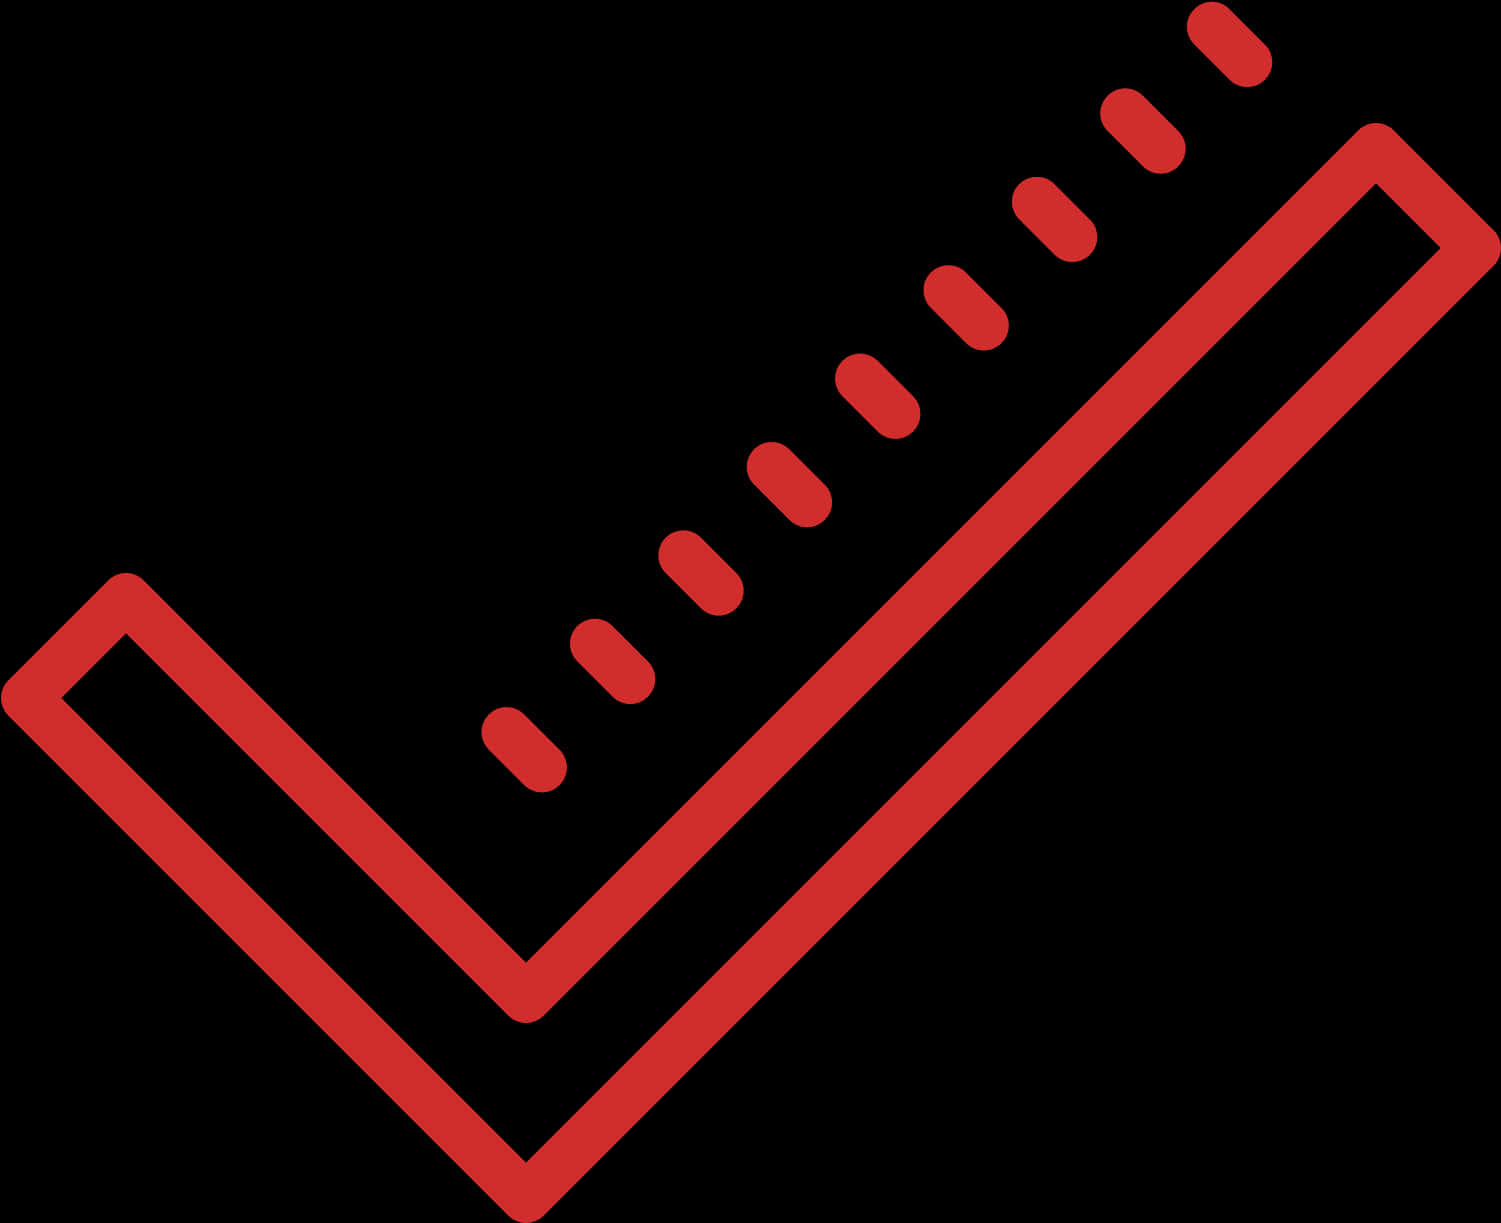 A Black And Red Line With Dots